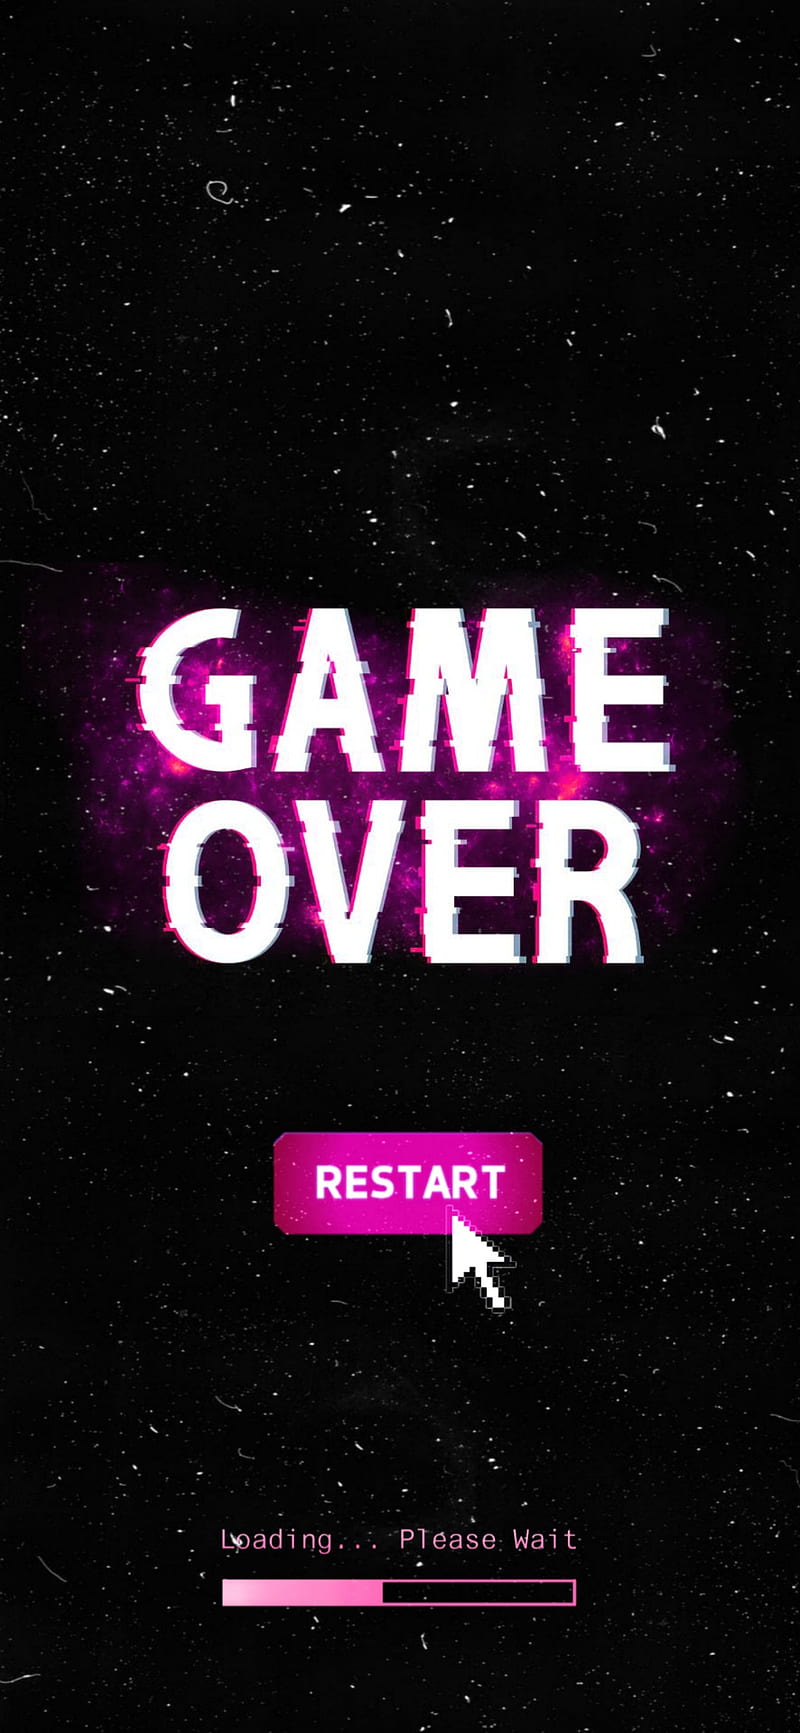 Game Over Wallpaper  HD Wallpaper Collection  Retro games wallpaper Pc  games wallpapers Cyberpunk games